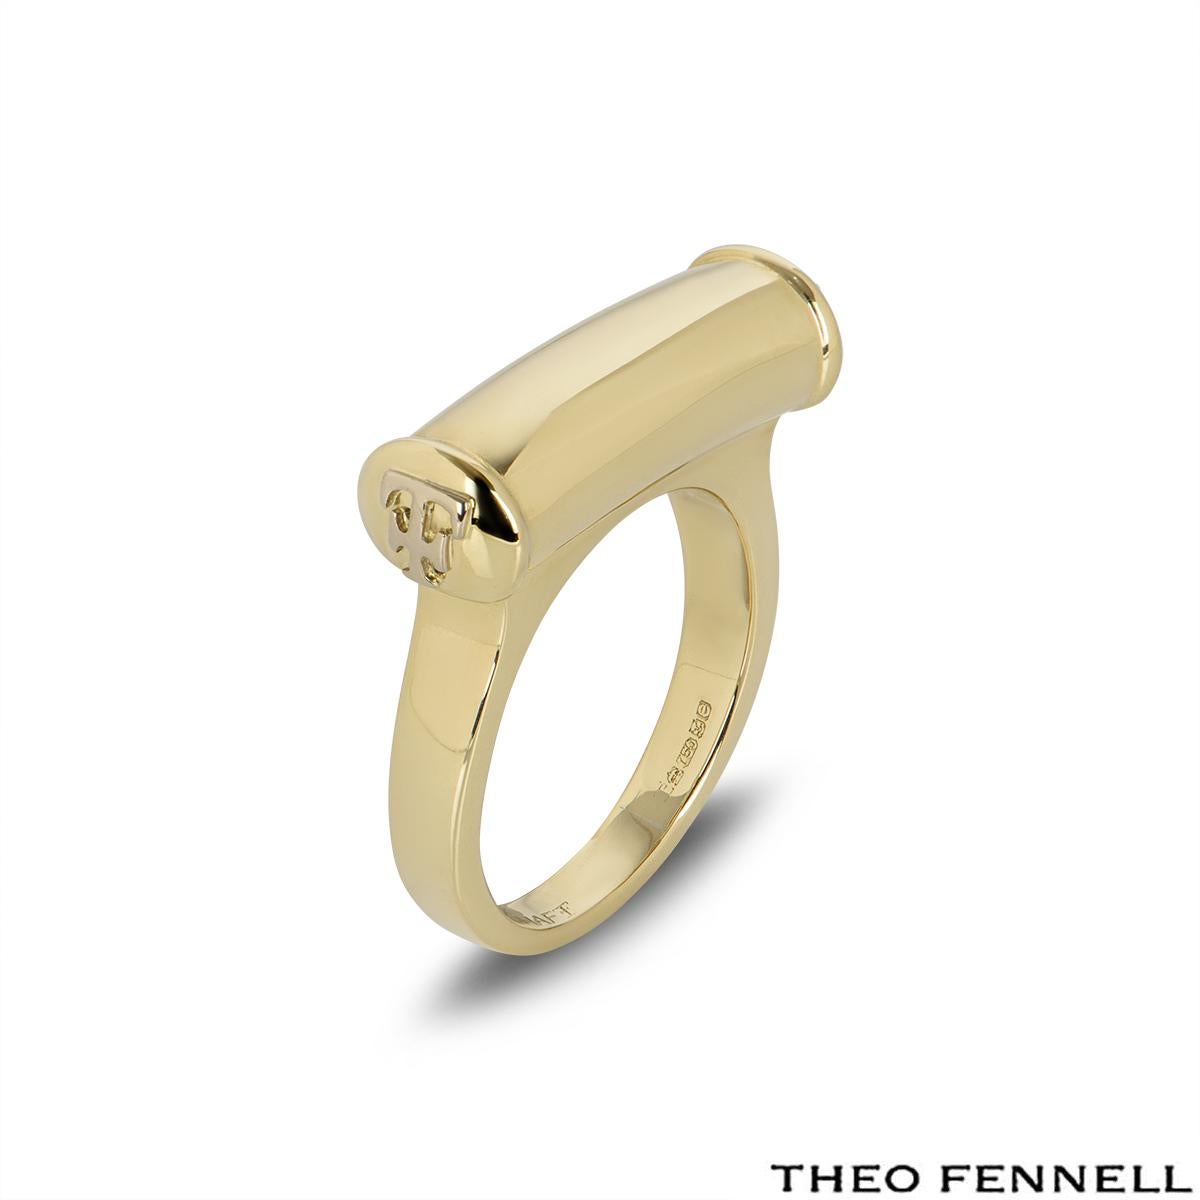 An iconic 18k yellow gold dress ring by Theo Fennell. The ring features a yellow gold barrel with the traditional 'TF' on either side. The band measures at 5mm and tapers down to 3mm, it is currently a size  UK Q  & US 8.5 but can be adjusted for a